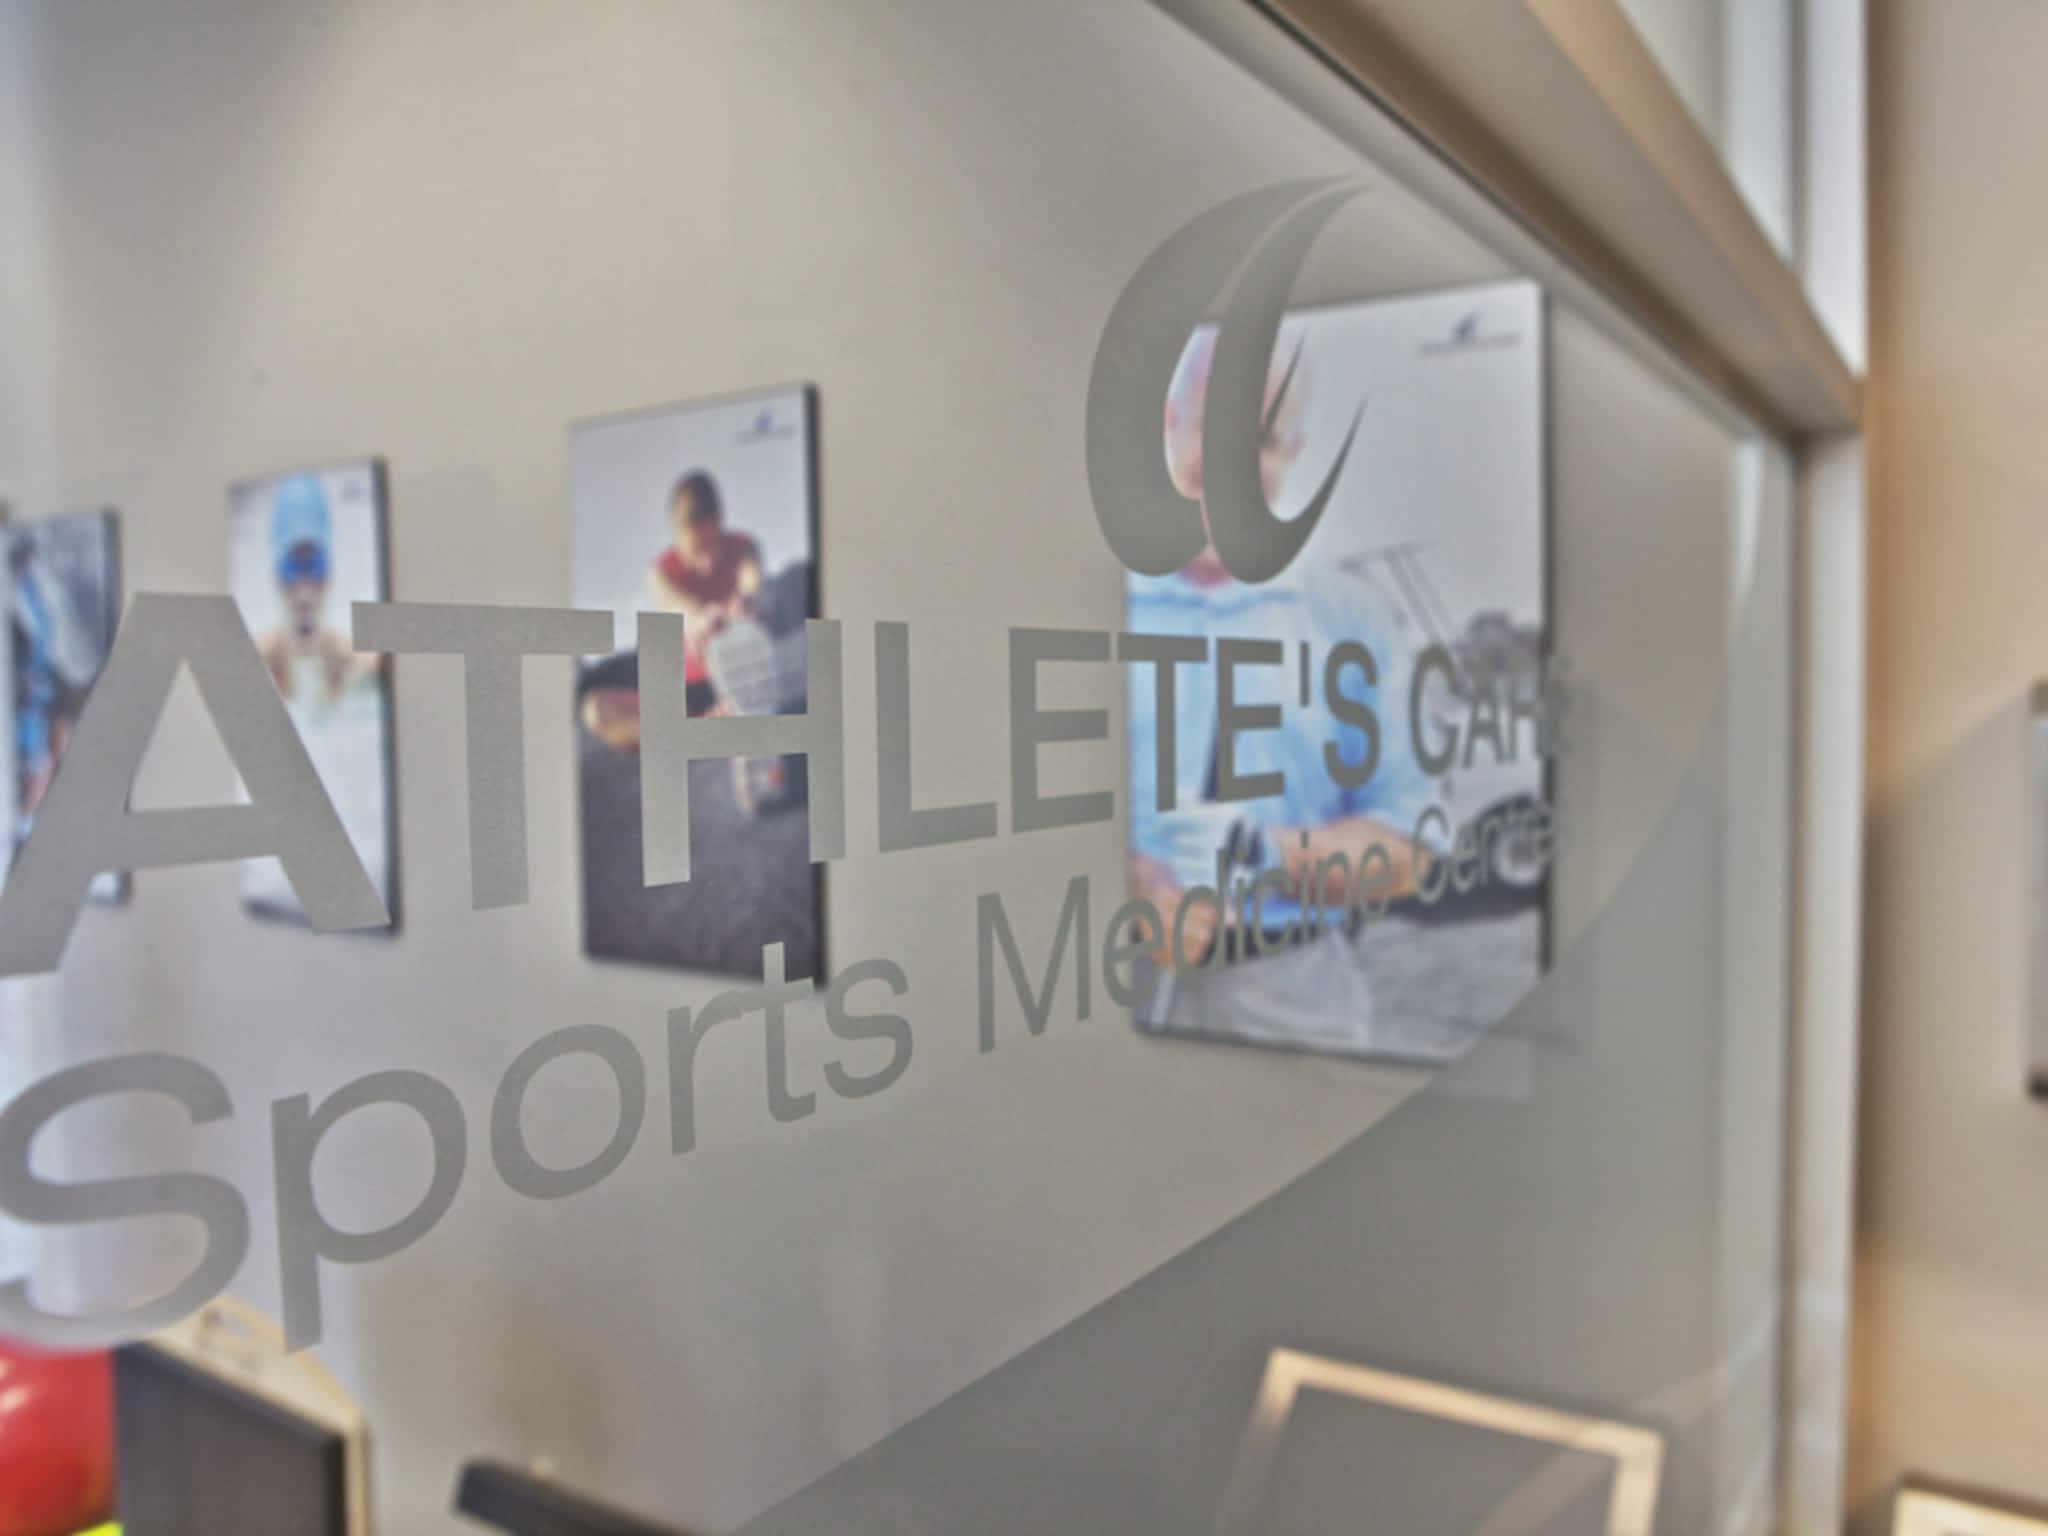 photo Athlete's Care Sports Medicine Centres - One Health Clubs